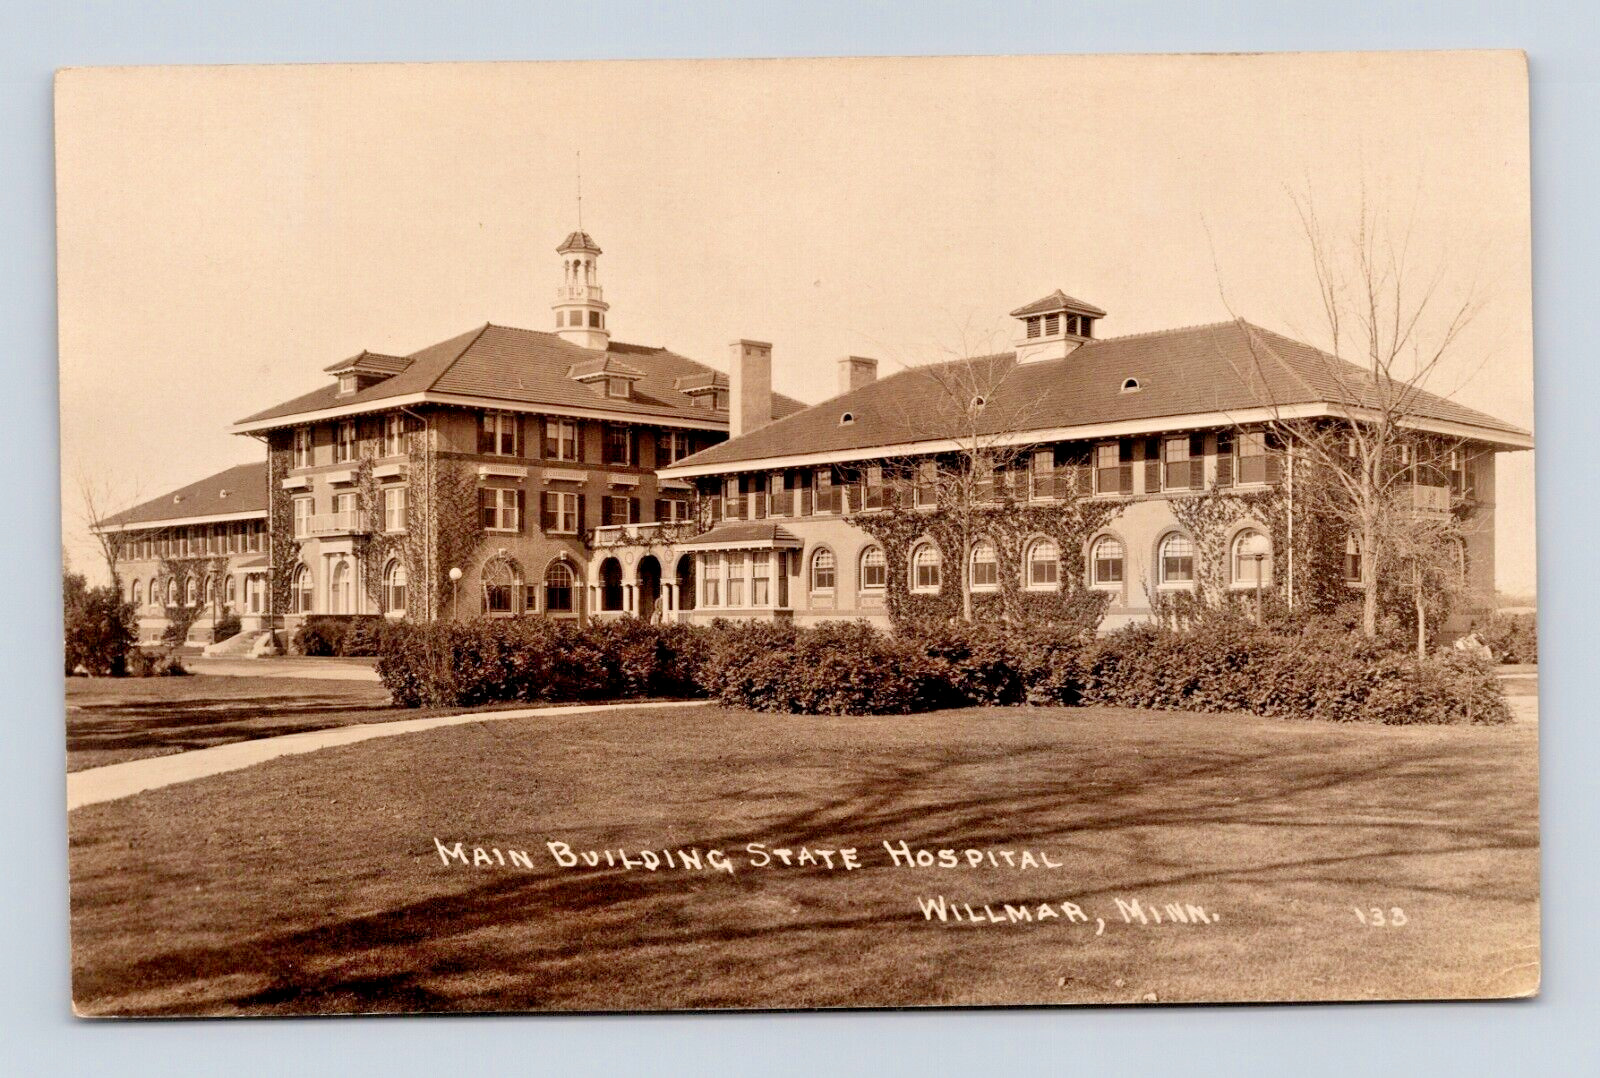 WILLMAR MN OLD VIEW OF THE MAIN BUILDING AT THE STATE HOSPITAL POSTCARD (H-33)